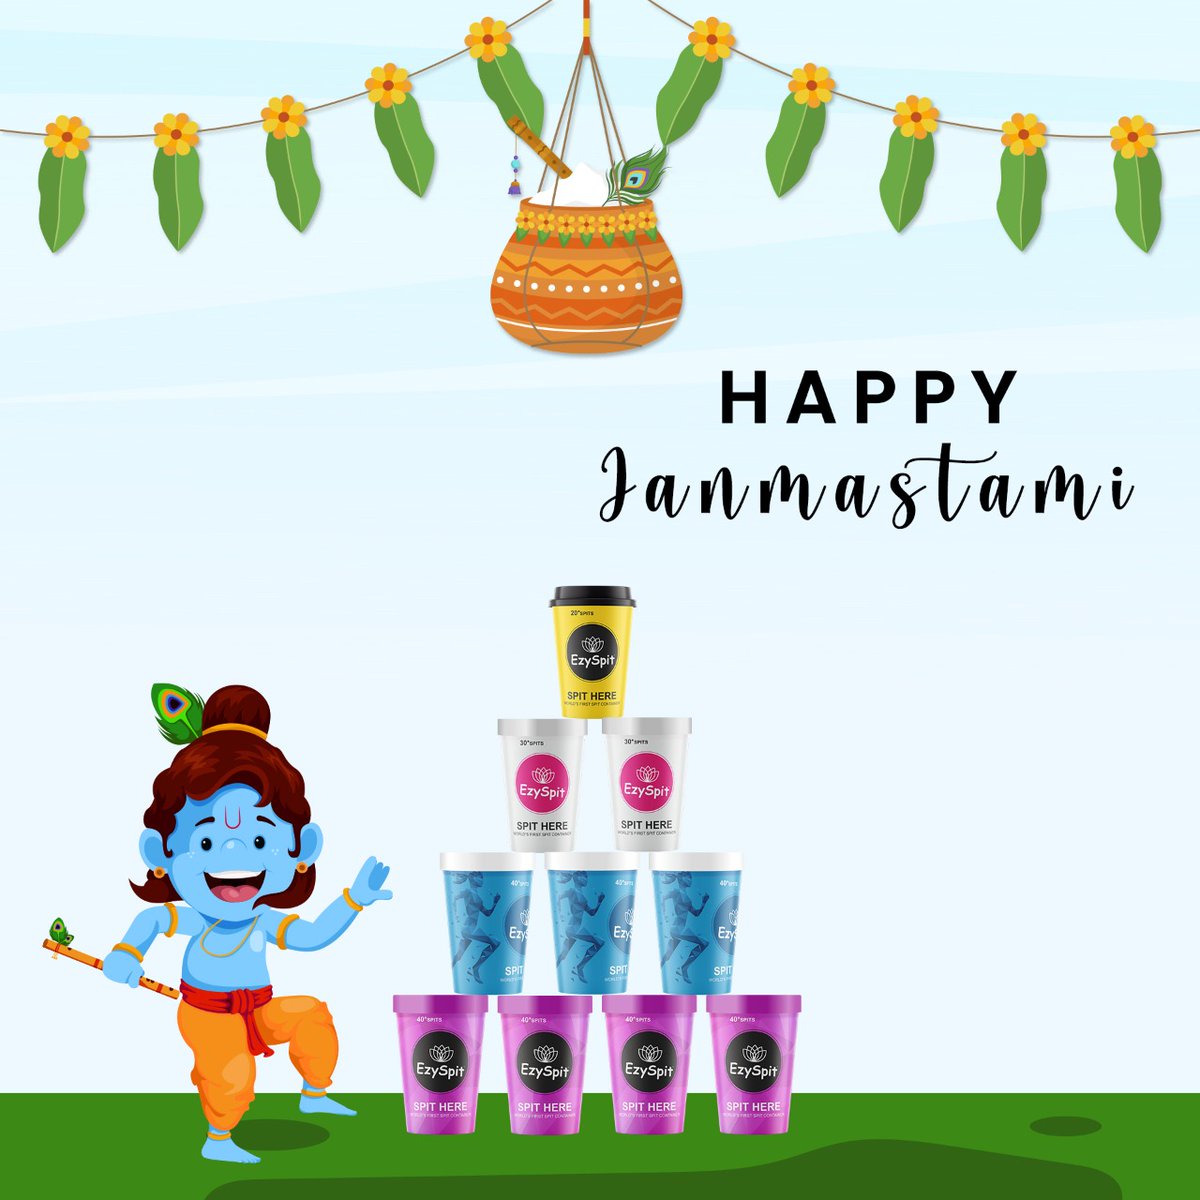 Together we stand, and together we will reach our goal - A Spit Free, Germ-Free, Disease-Free India. 

Ezyspit wishes you a very Happy and safe Janmashtami! 

#EzySpit #spittingcup #covid19  #beresponsible #innovation #ecofriendly #swachchbharat #indiafightscovid #janmashtami